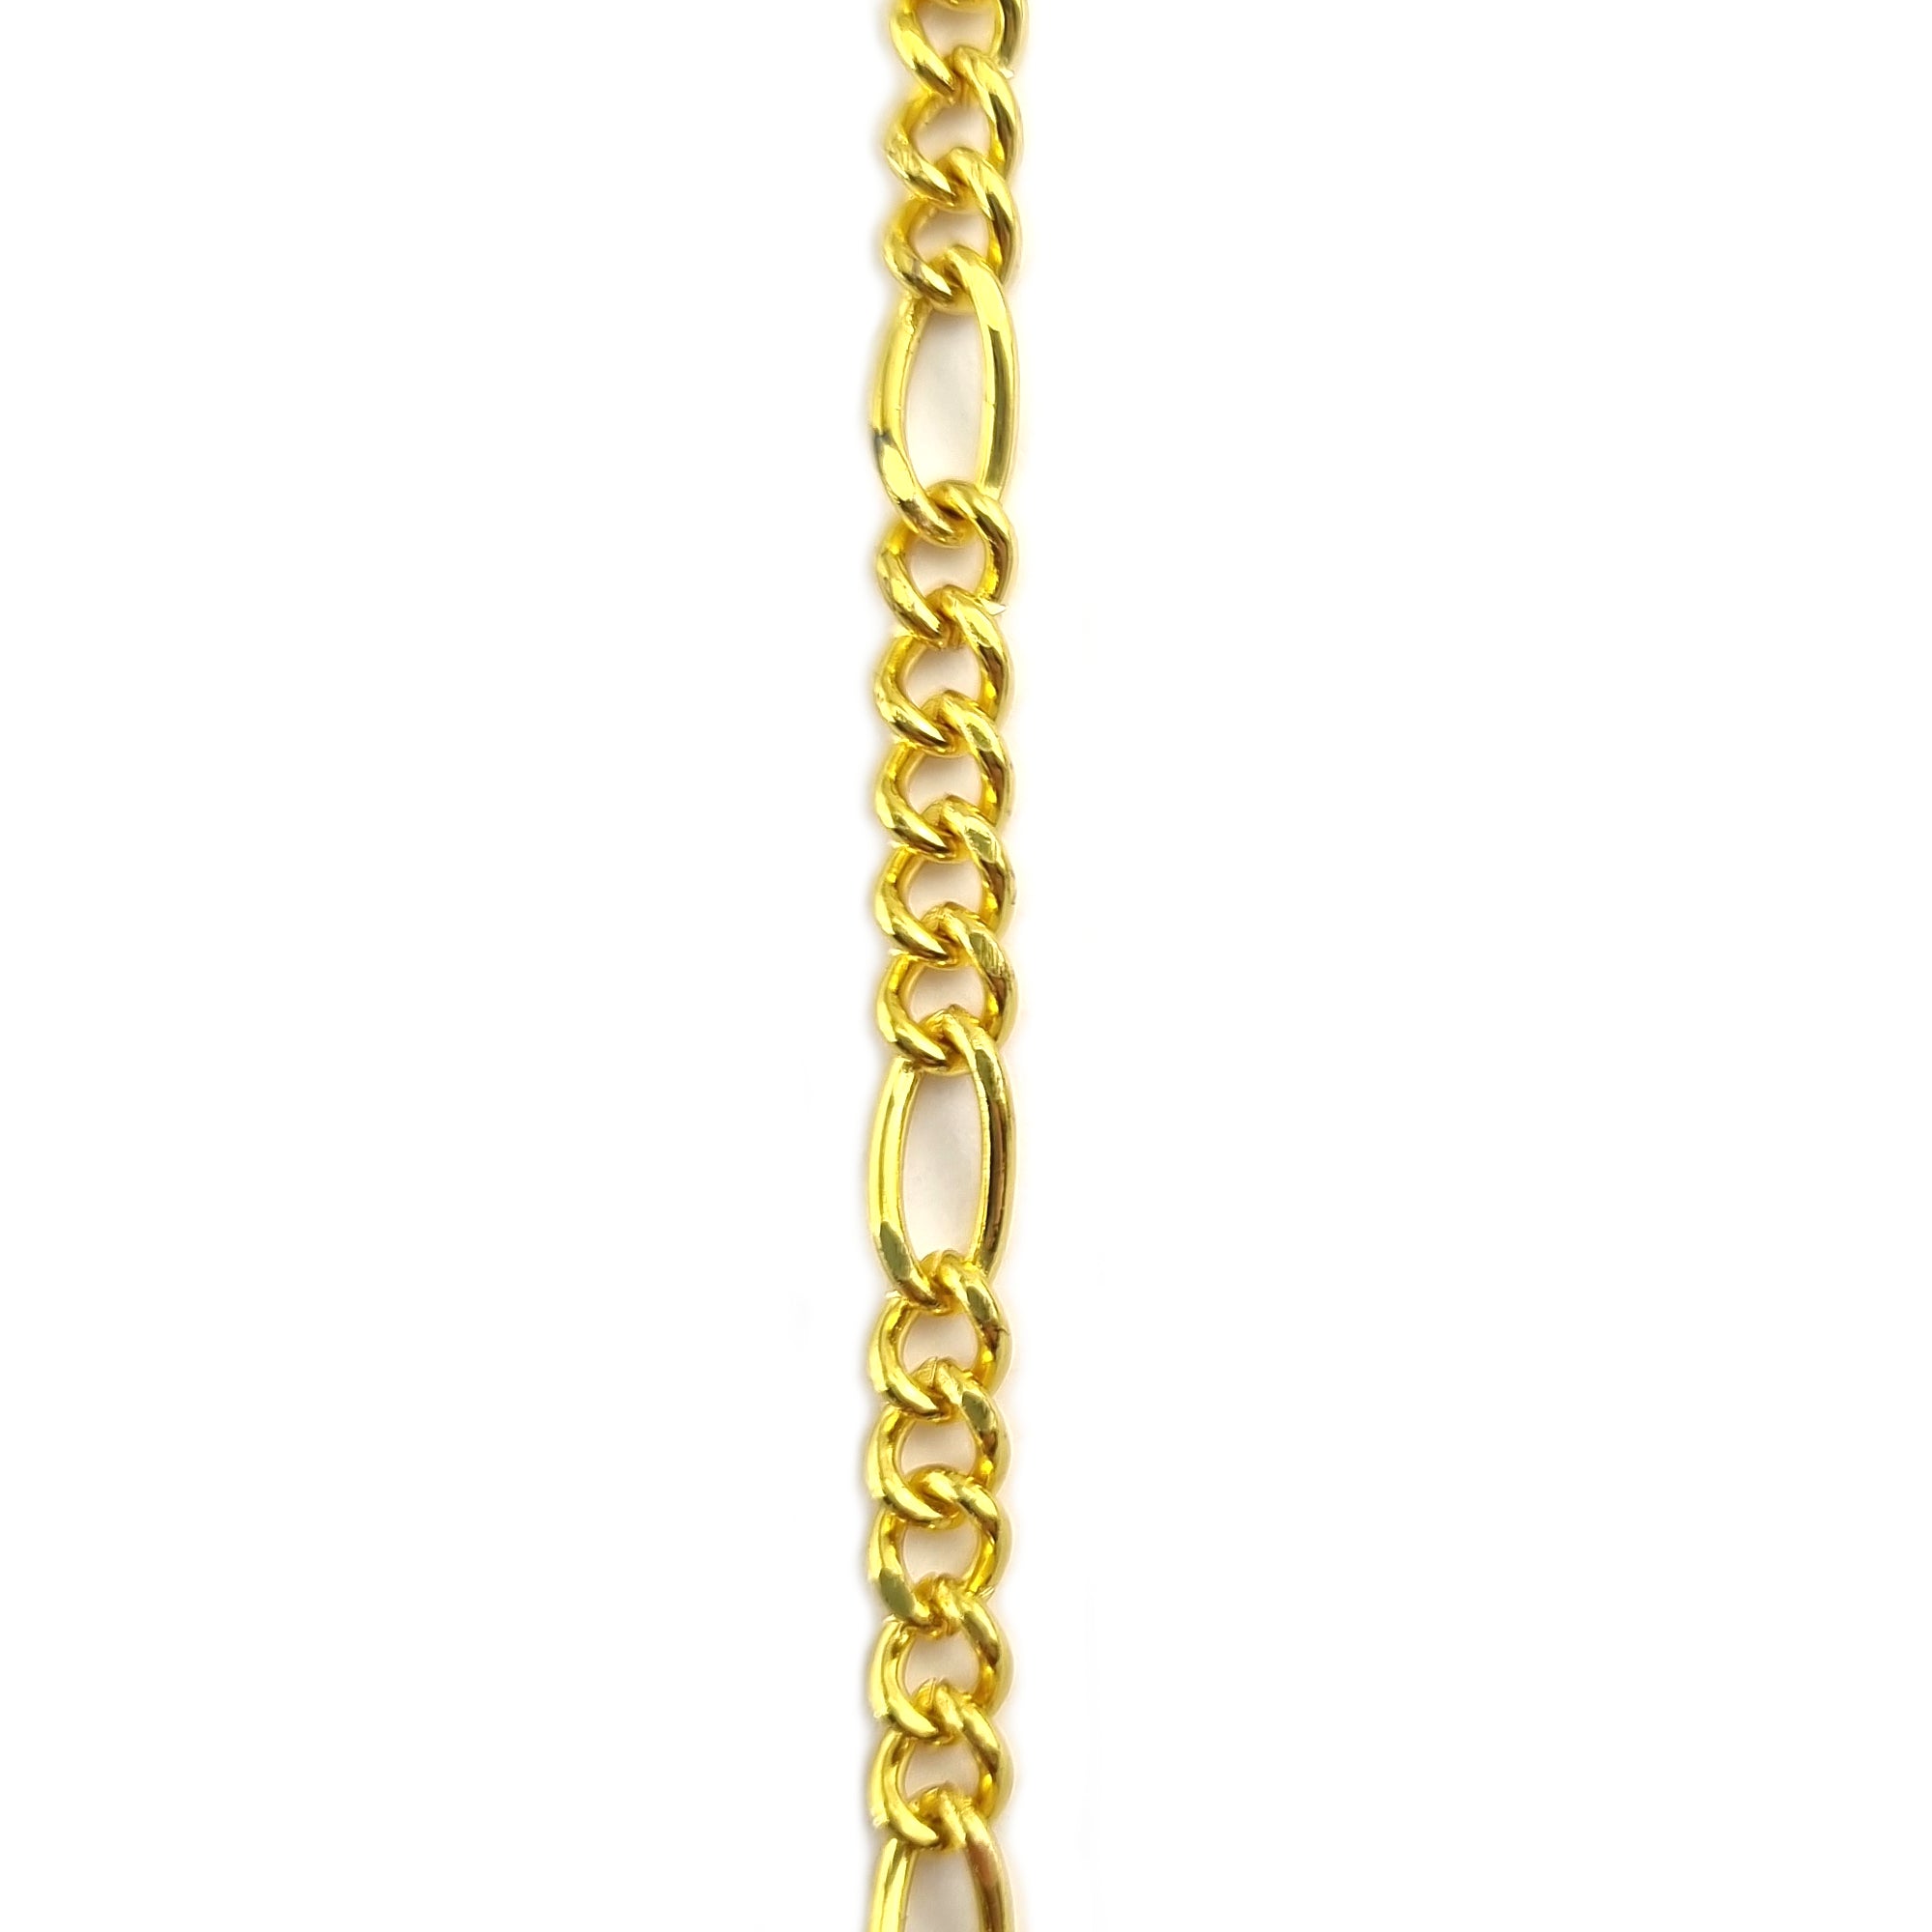 Figaro Curb Chain Gold Plated. Shop Jewellery Chain online. Australia wide shipping. Chain.com.au